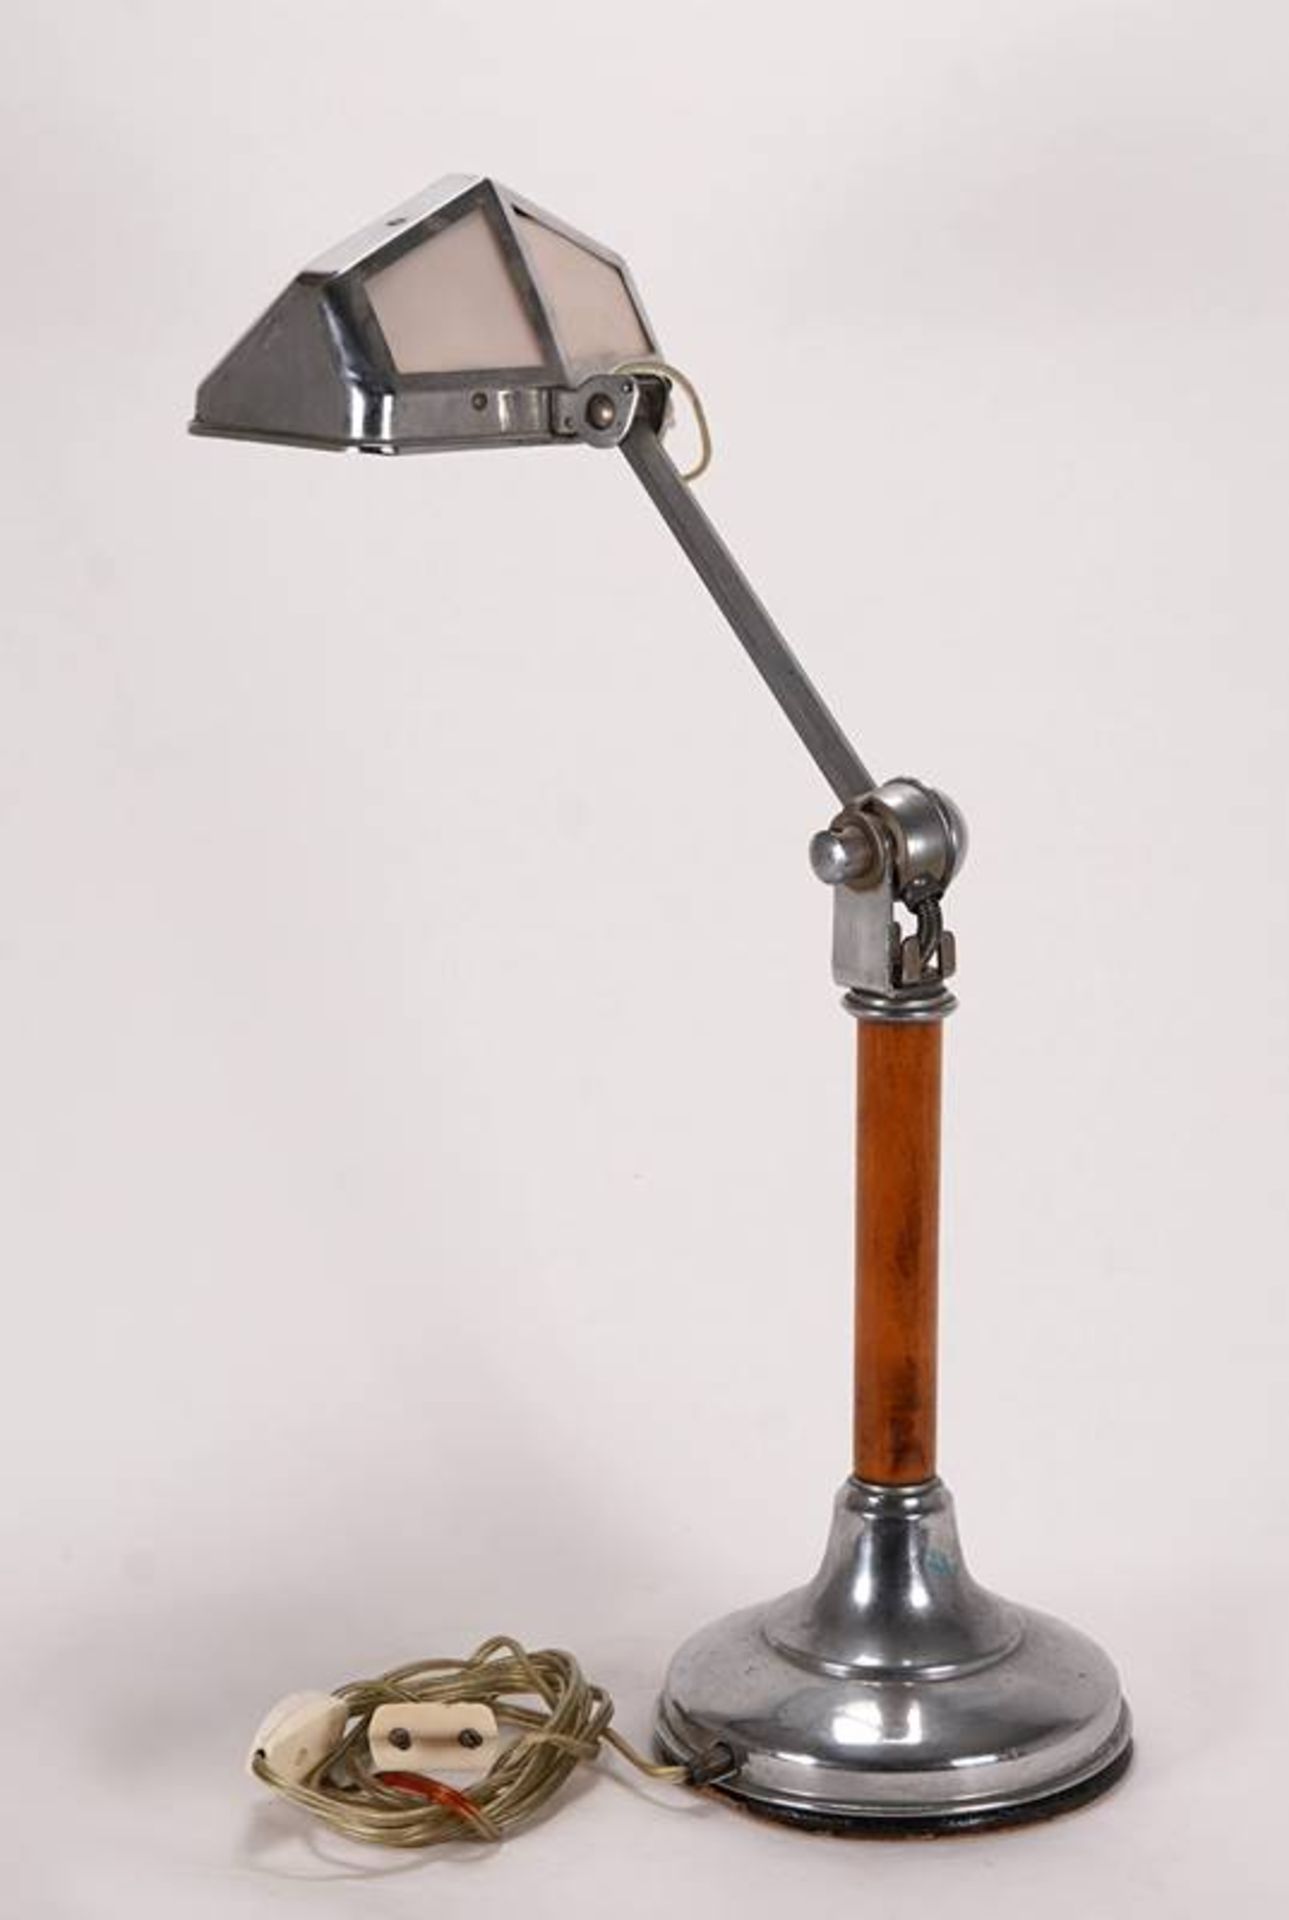 Art Deco table lamp - Image 2 of 4